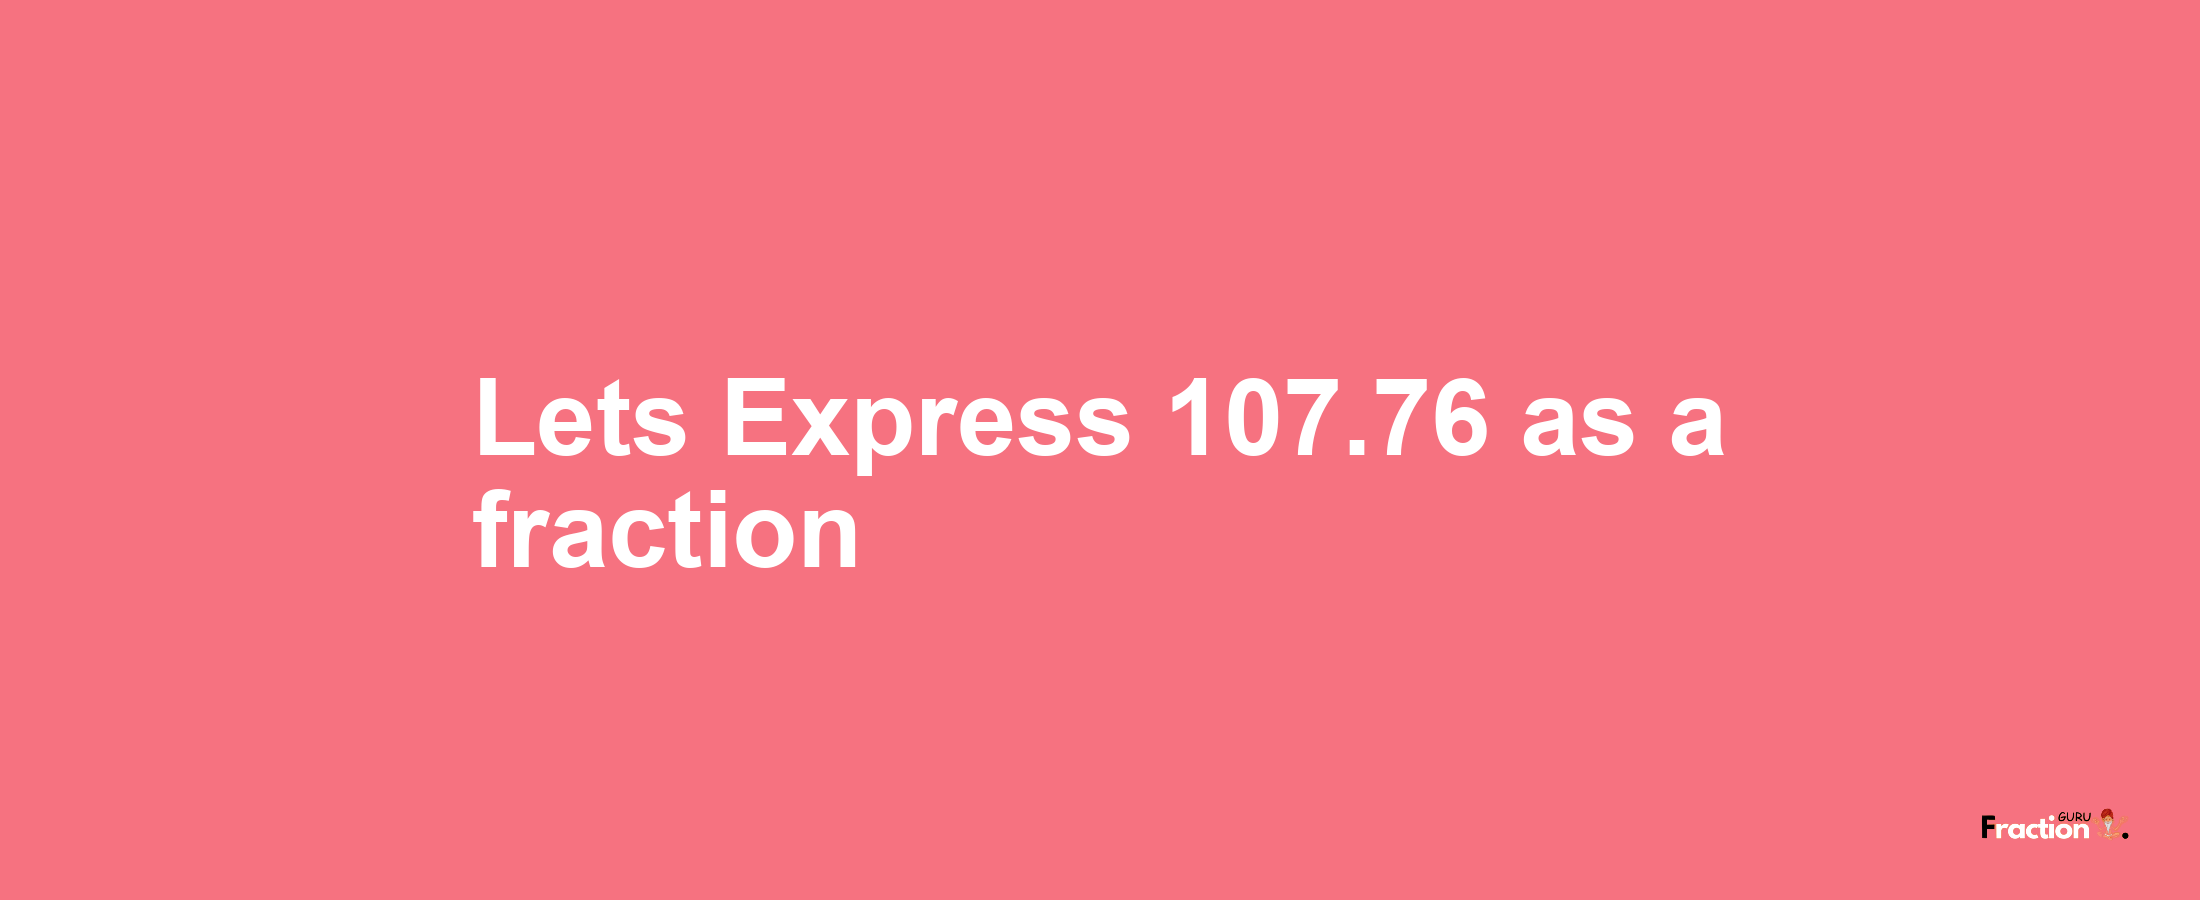 Lets Express 107.76 as afraction